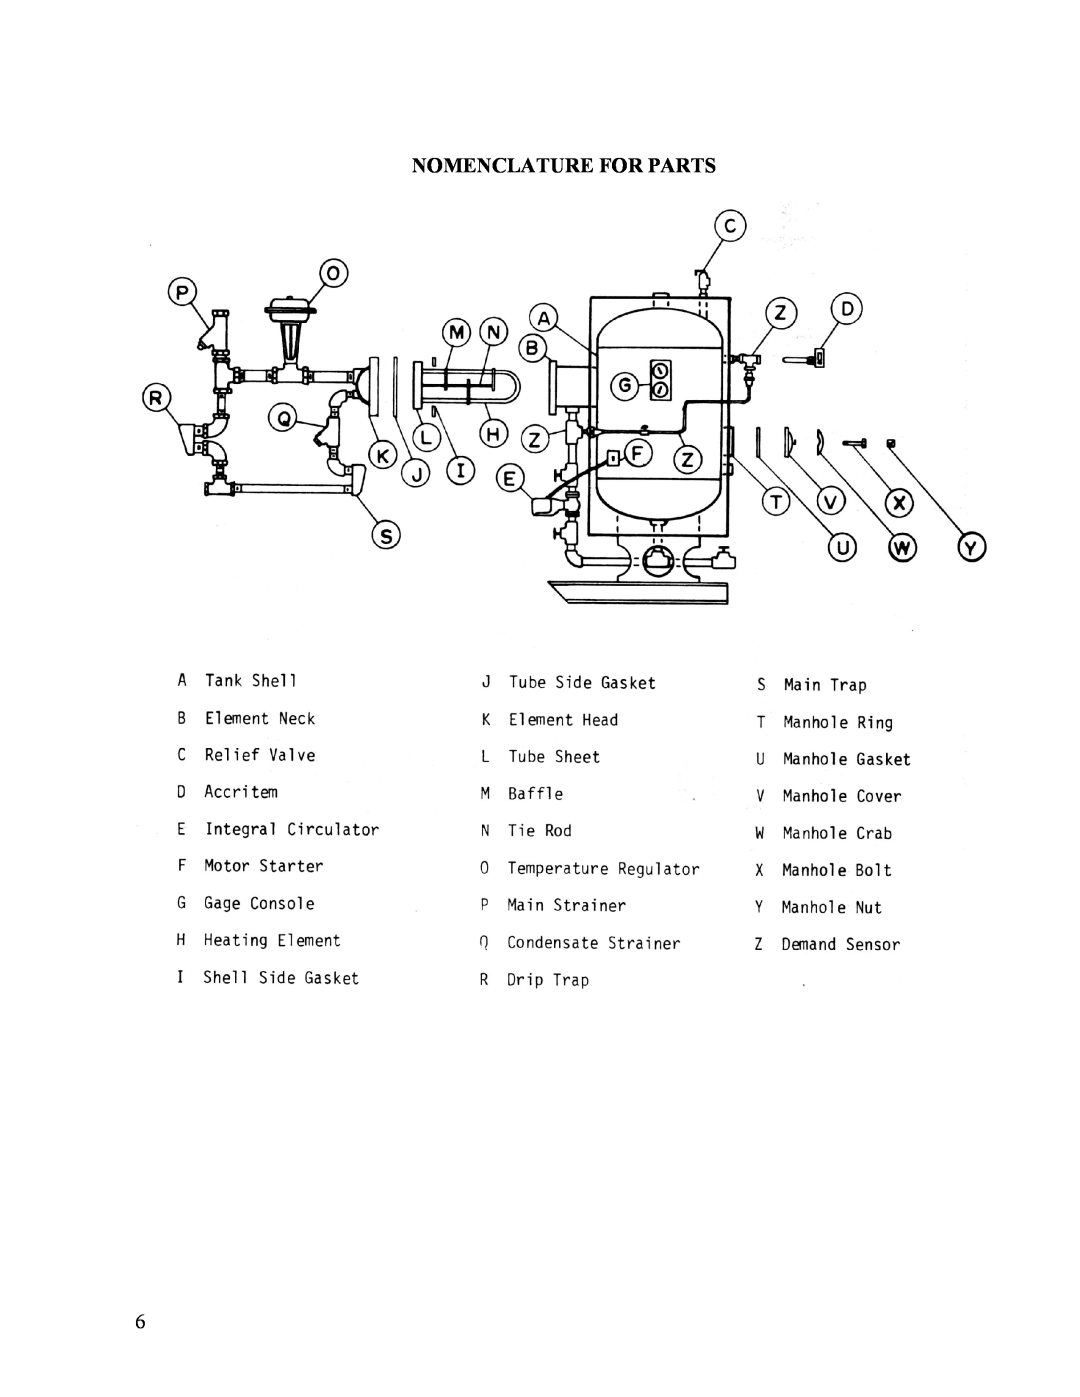 Hubbell STH manual Nomenclature For Parts 